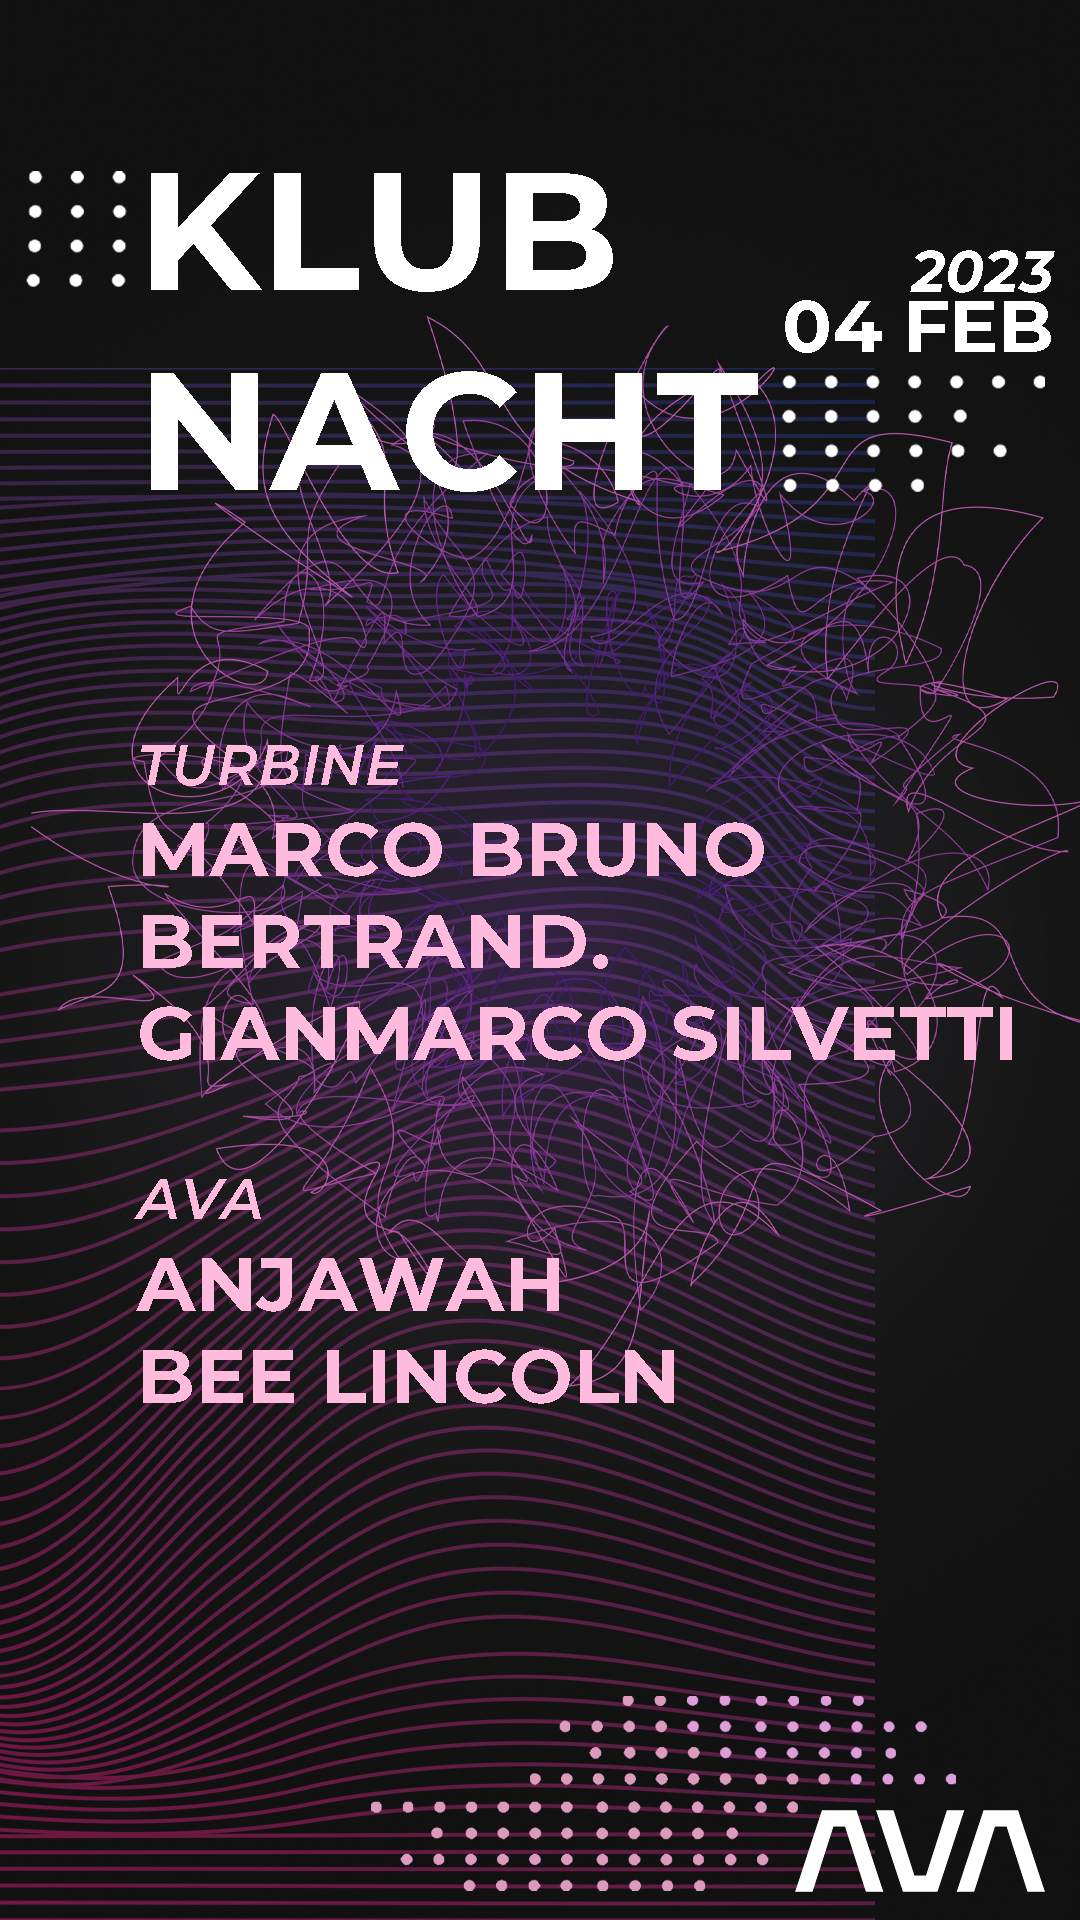  ☻ Klubnacht ☻ :  Marco Bruno, Bertrand, Gianmarco Silvetti, Bee Lincoln, Anjawah   - フライヤー表